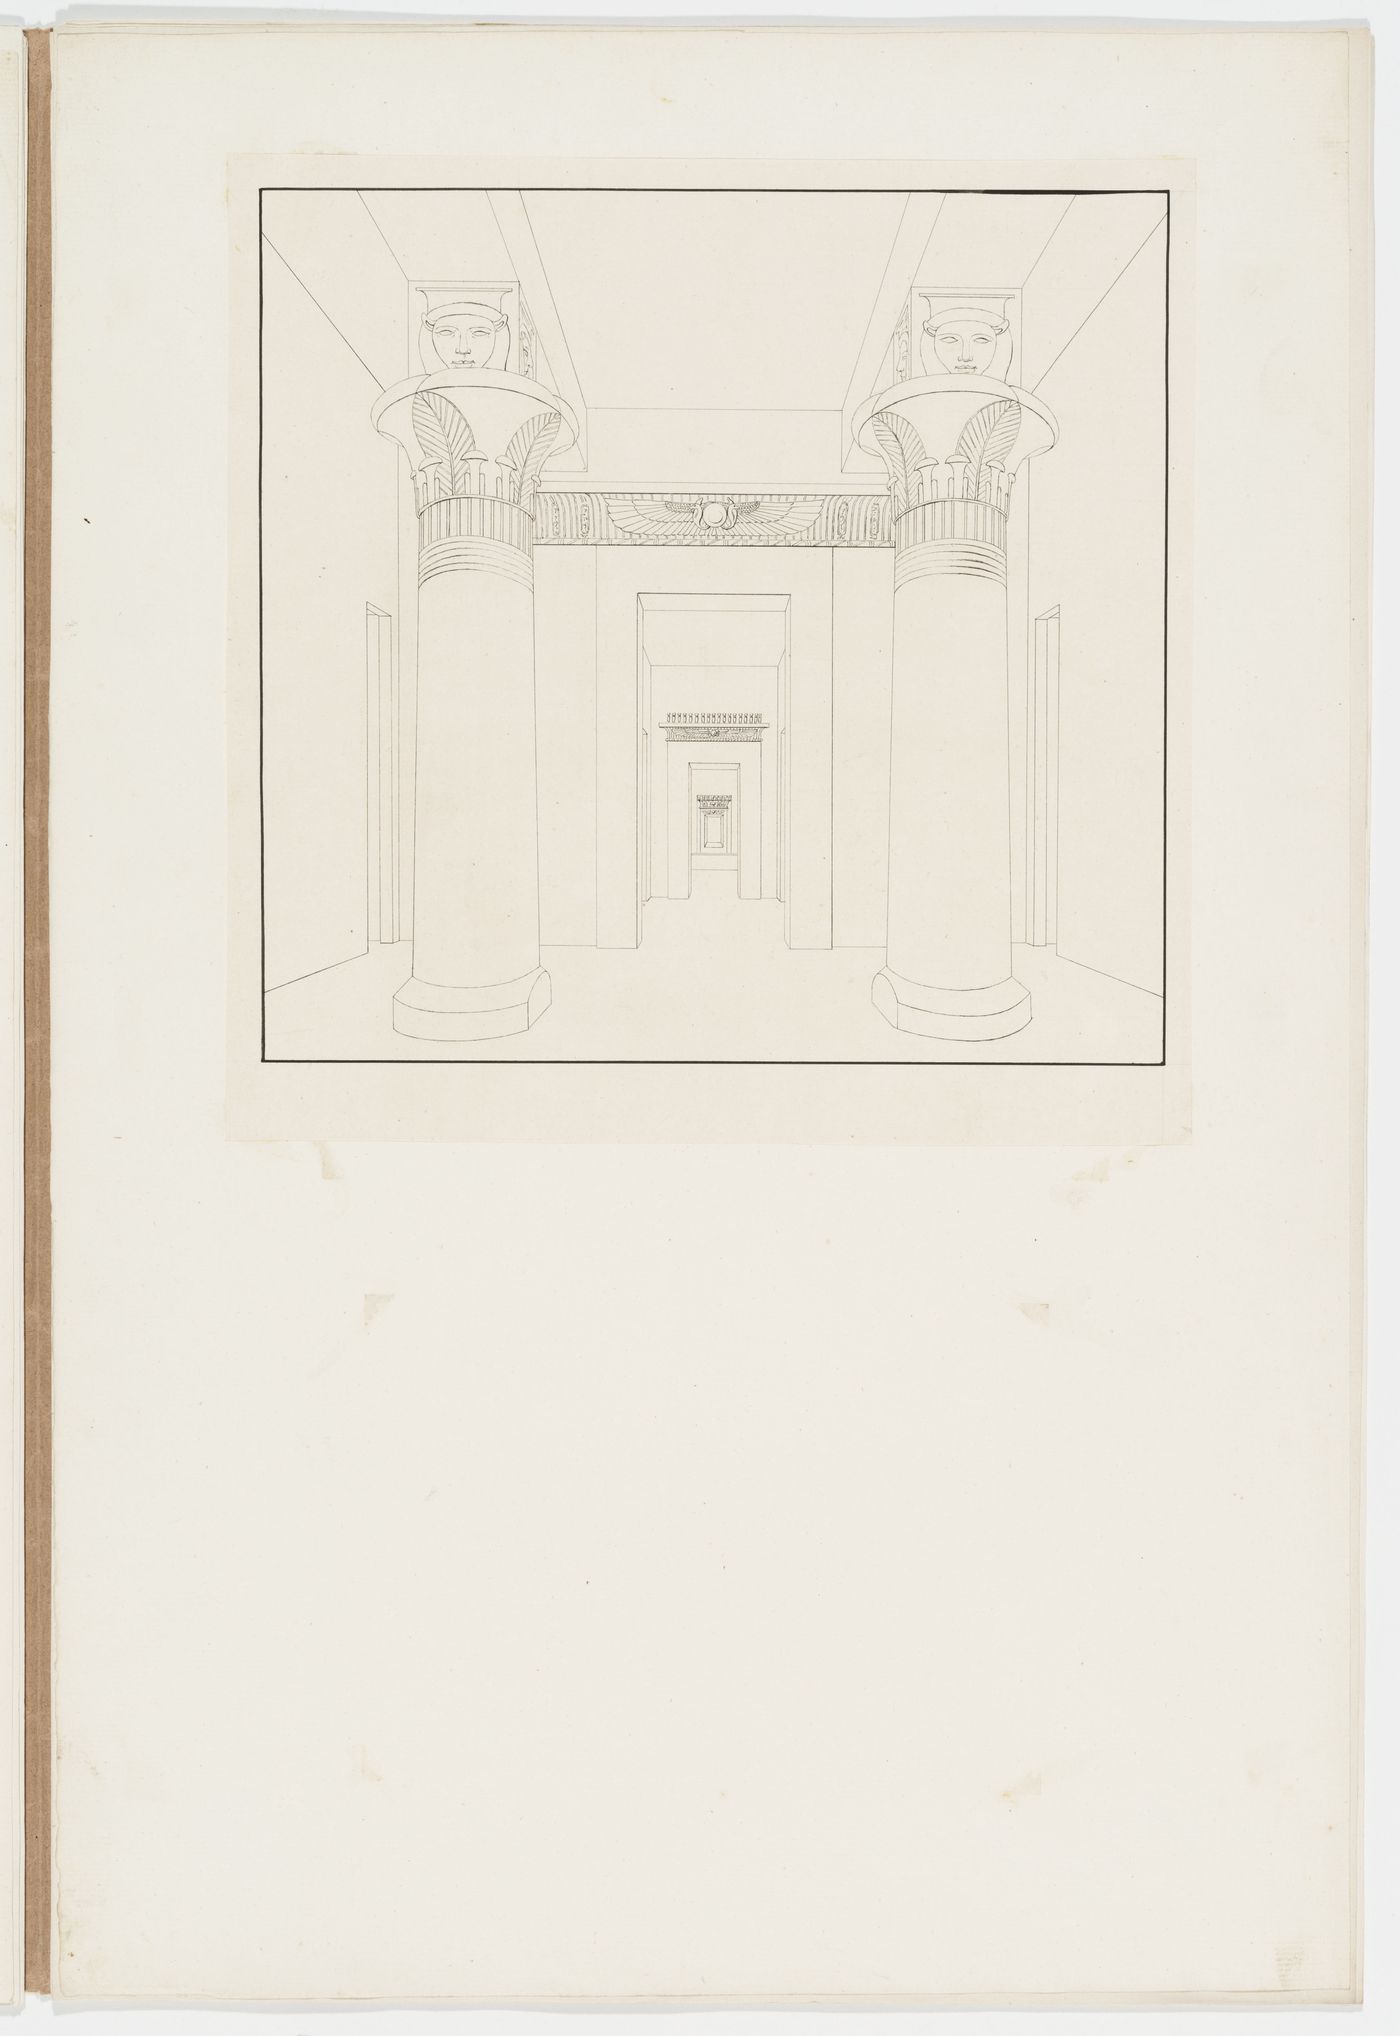 Interior perspective of rooms in the Egyptian Revival Style